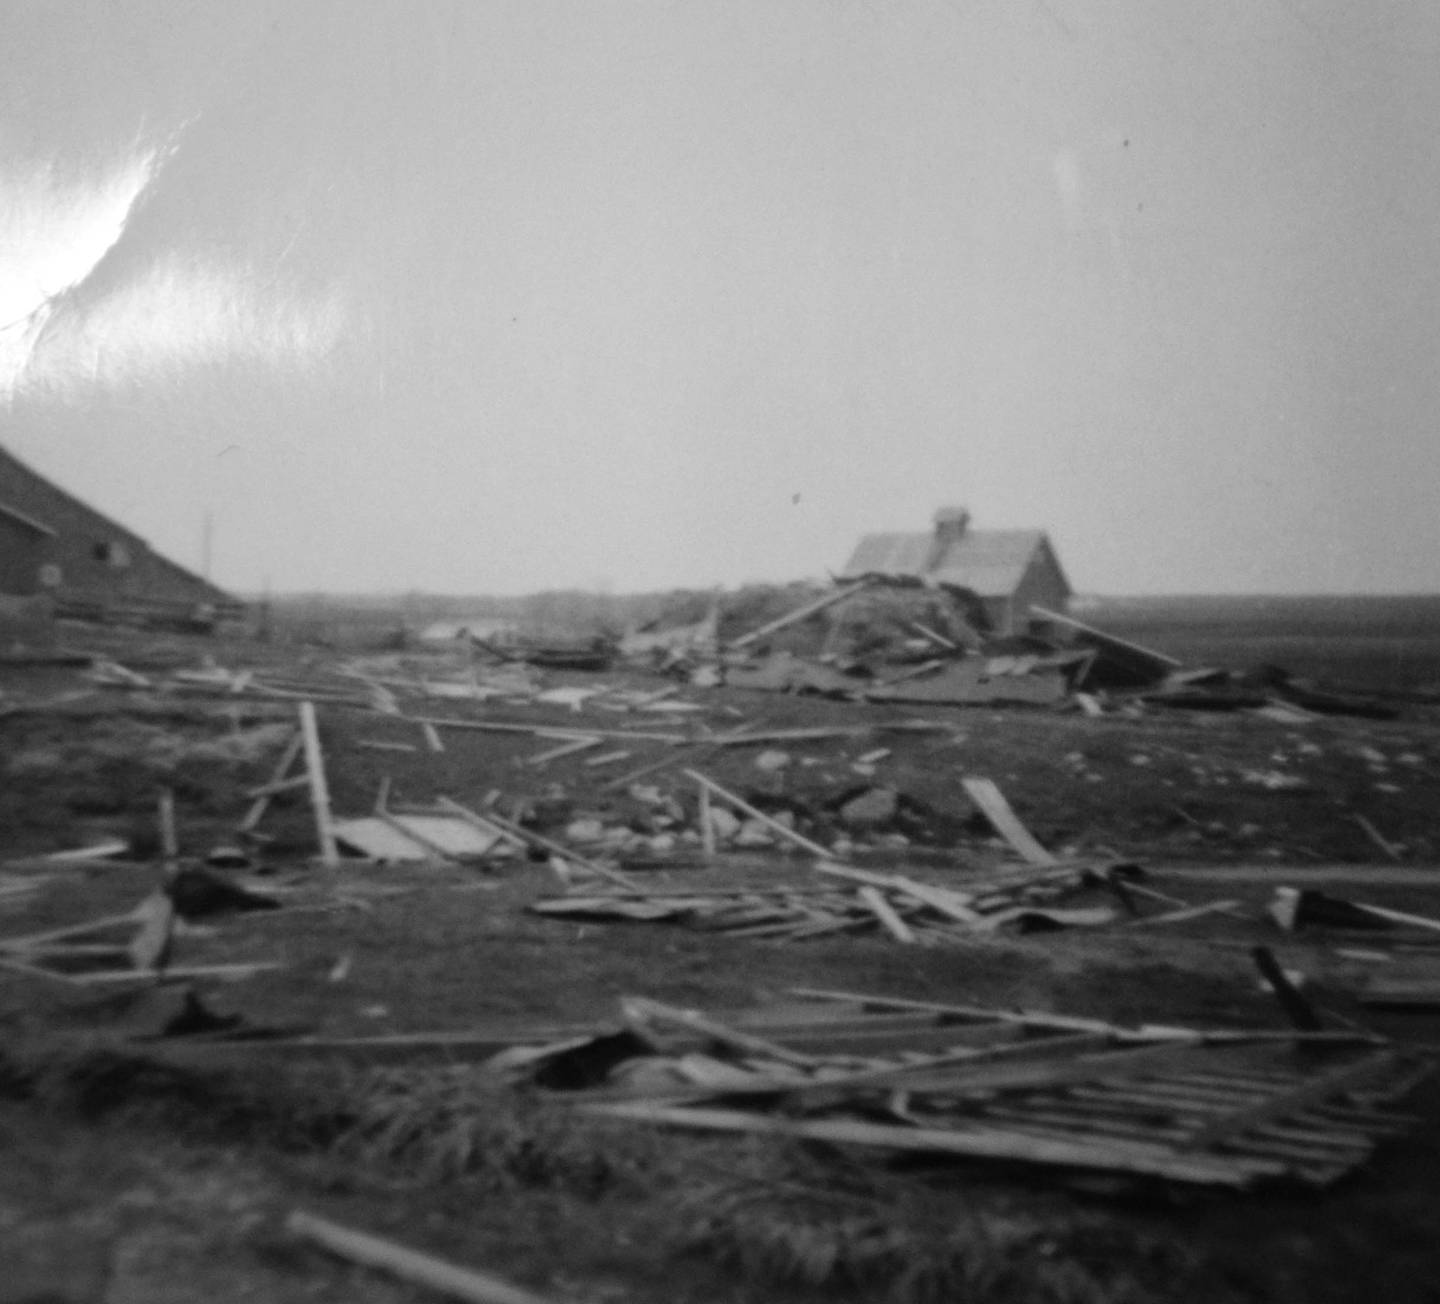 From his home at Barb City Manager on April 18, 2022, Paul Herrmann, whose family farm is located 8 miles west of Shabbona in Lee County, shared photos of how a tornado destroyed his cattle shed on April 21, 1967. The tornado was one of 45 that occurred during the outbreak. Three F4 tornadoes killed 58 people and injured more than 1,000.